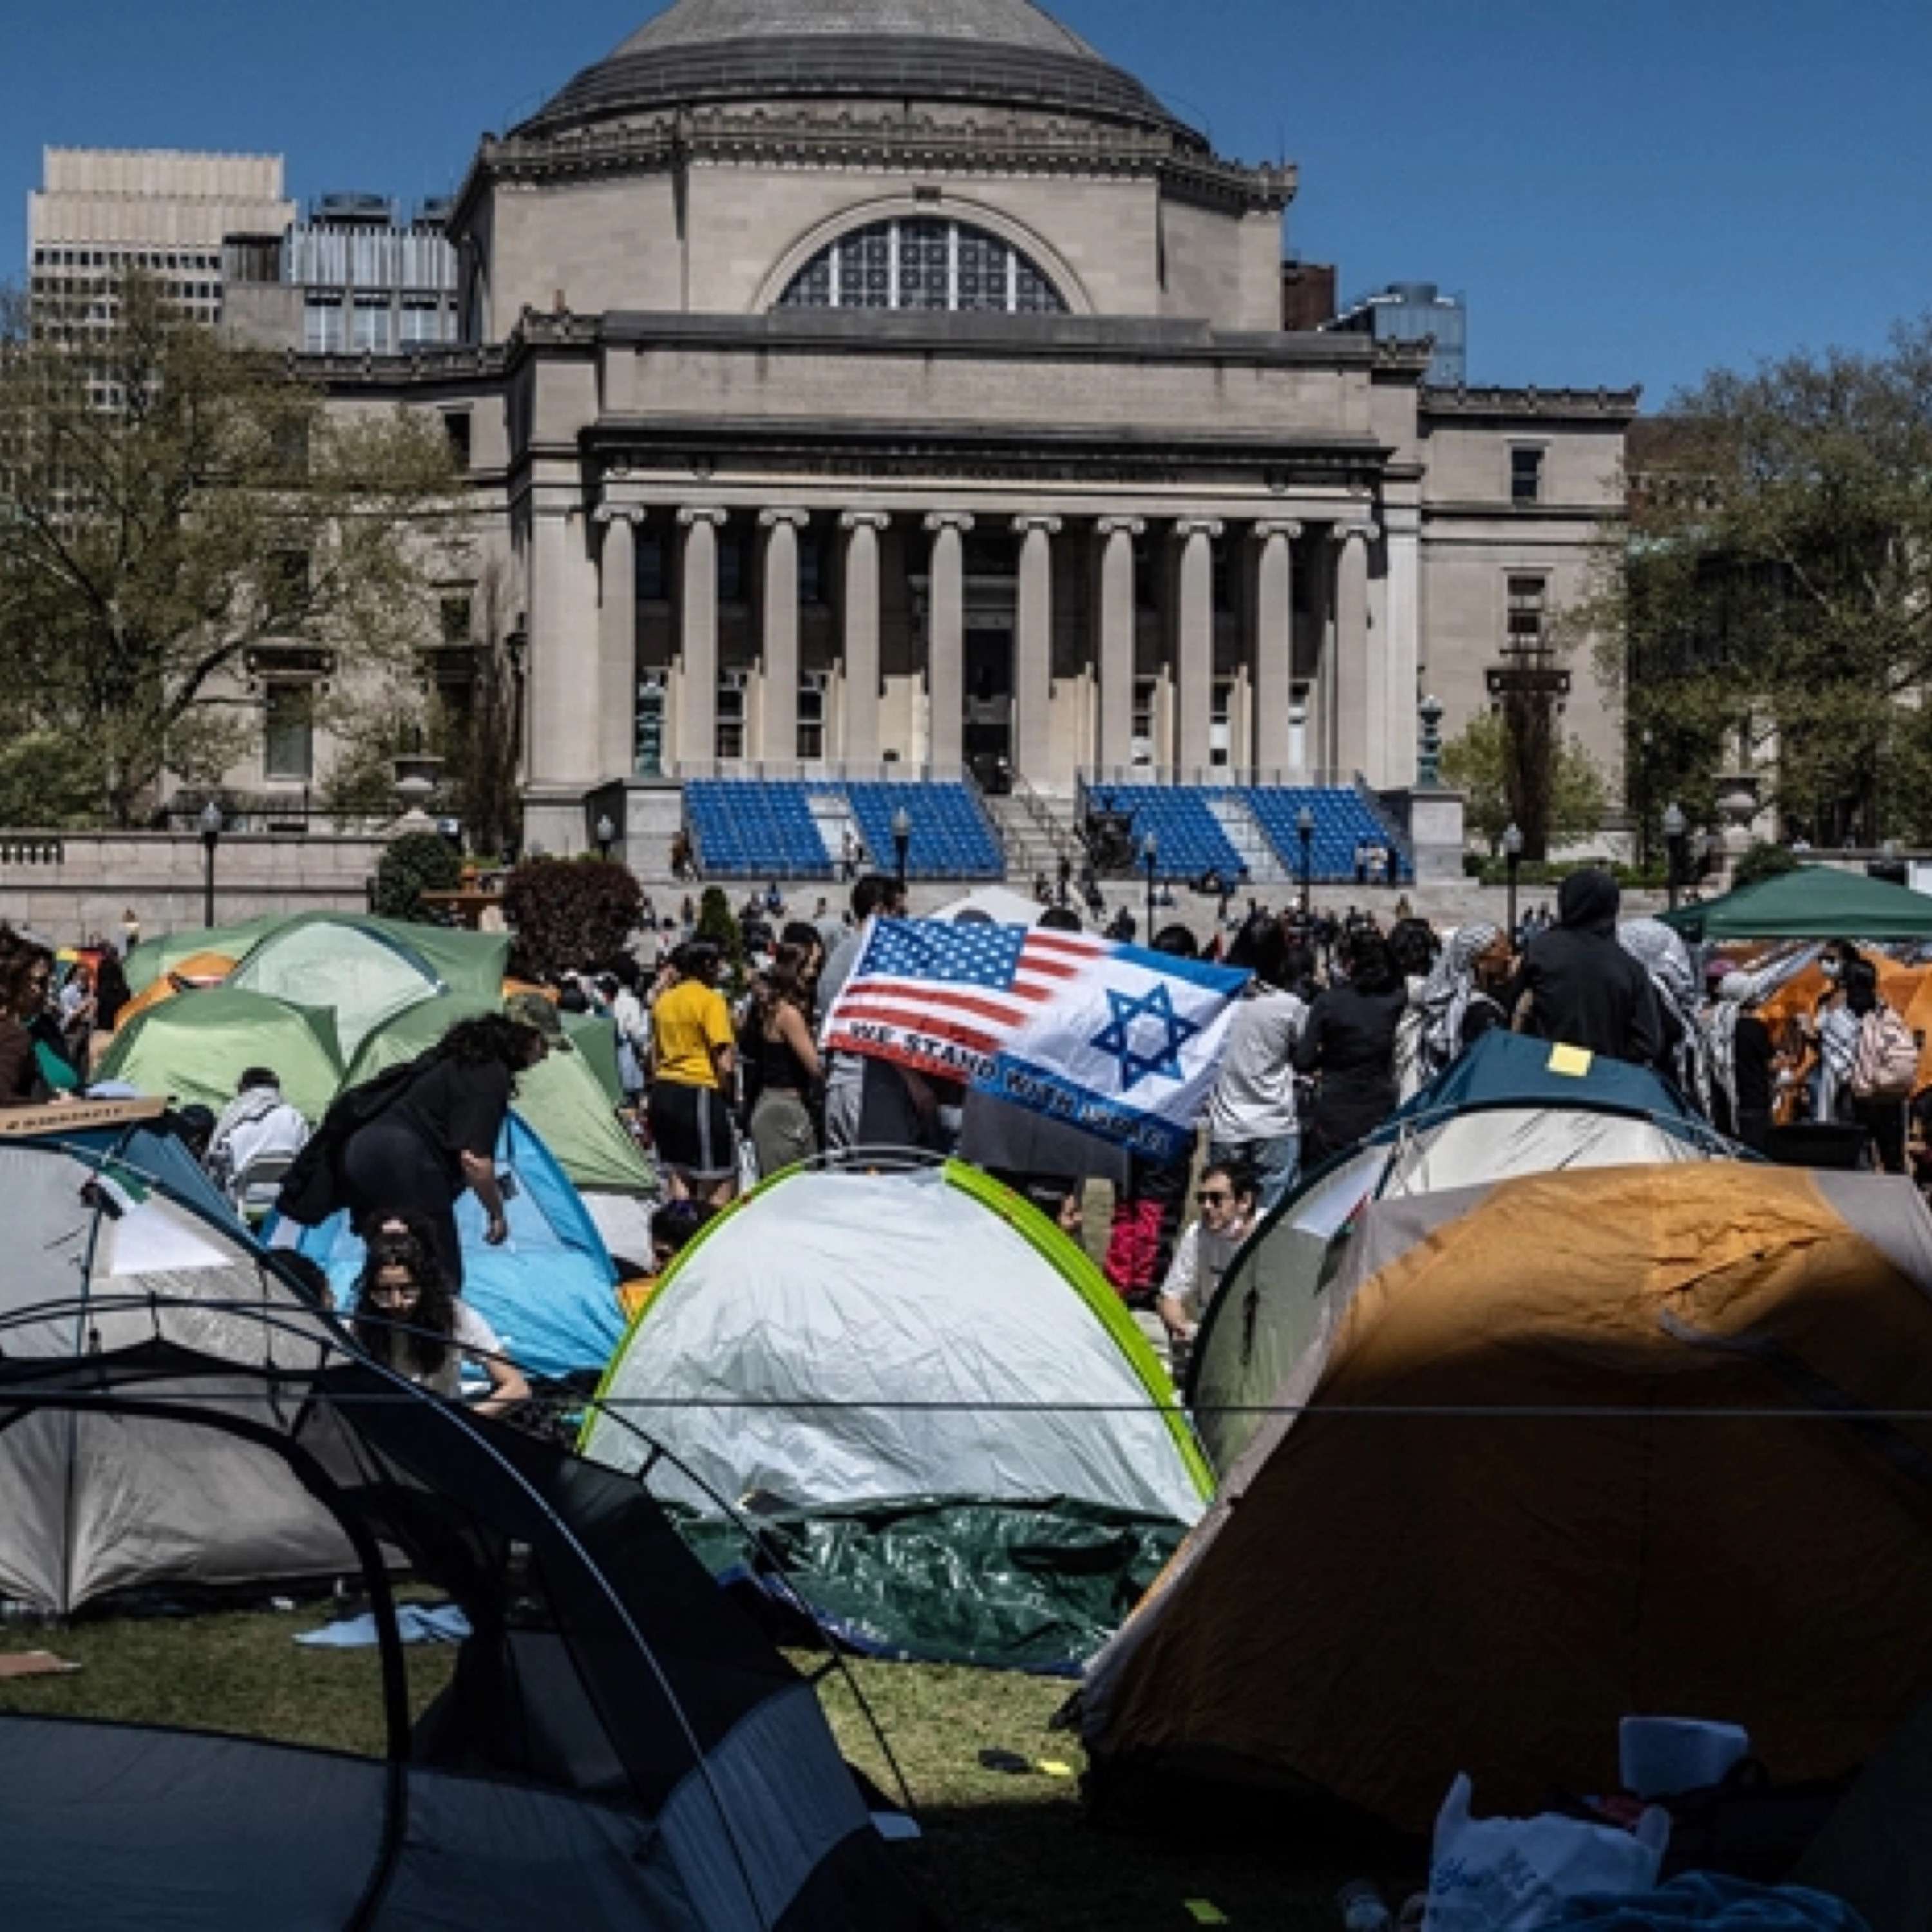 Columbia Anti-Israel Protests Praised by Hamas, Pro-Life Dems Run Graphic Ad, Importance of Intergenerational Relationships